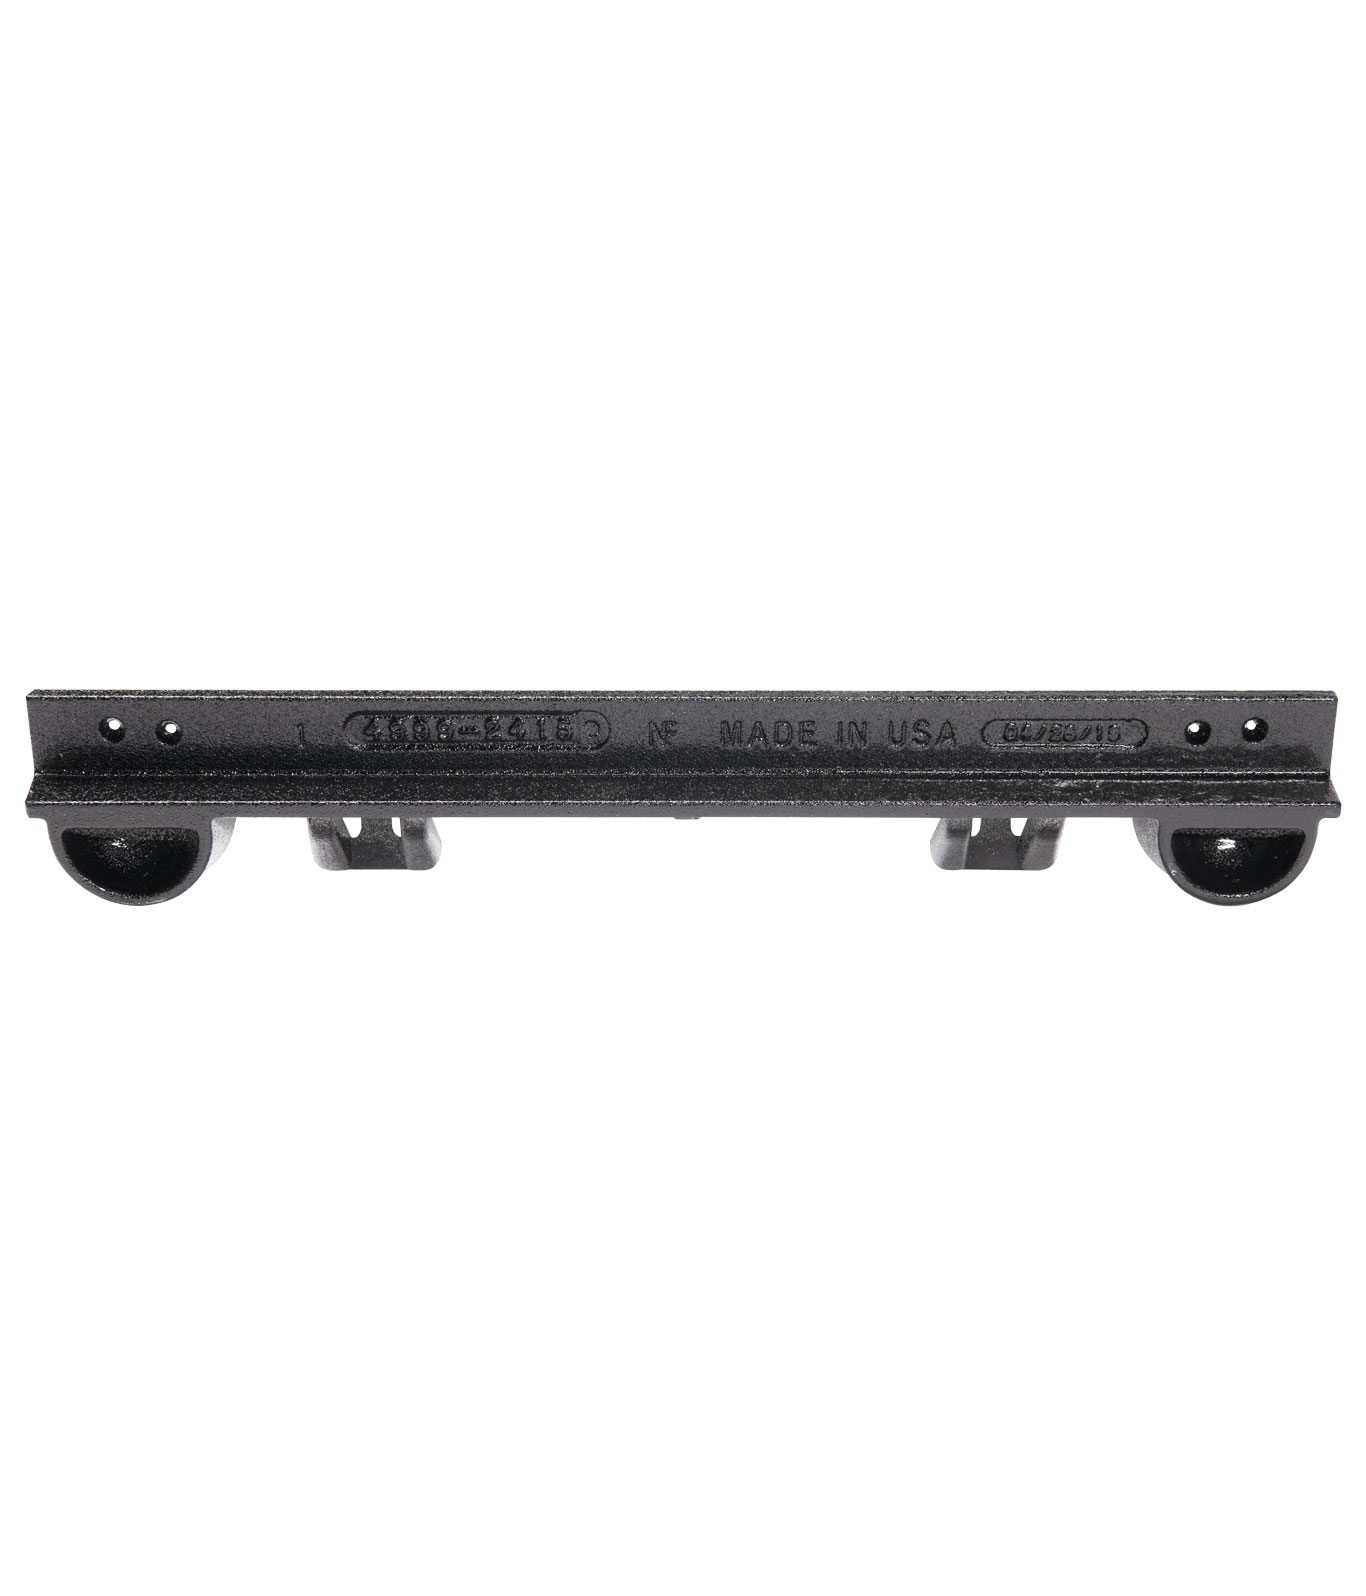 R-4990 trench grate frame with 24 inch width